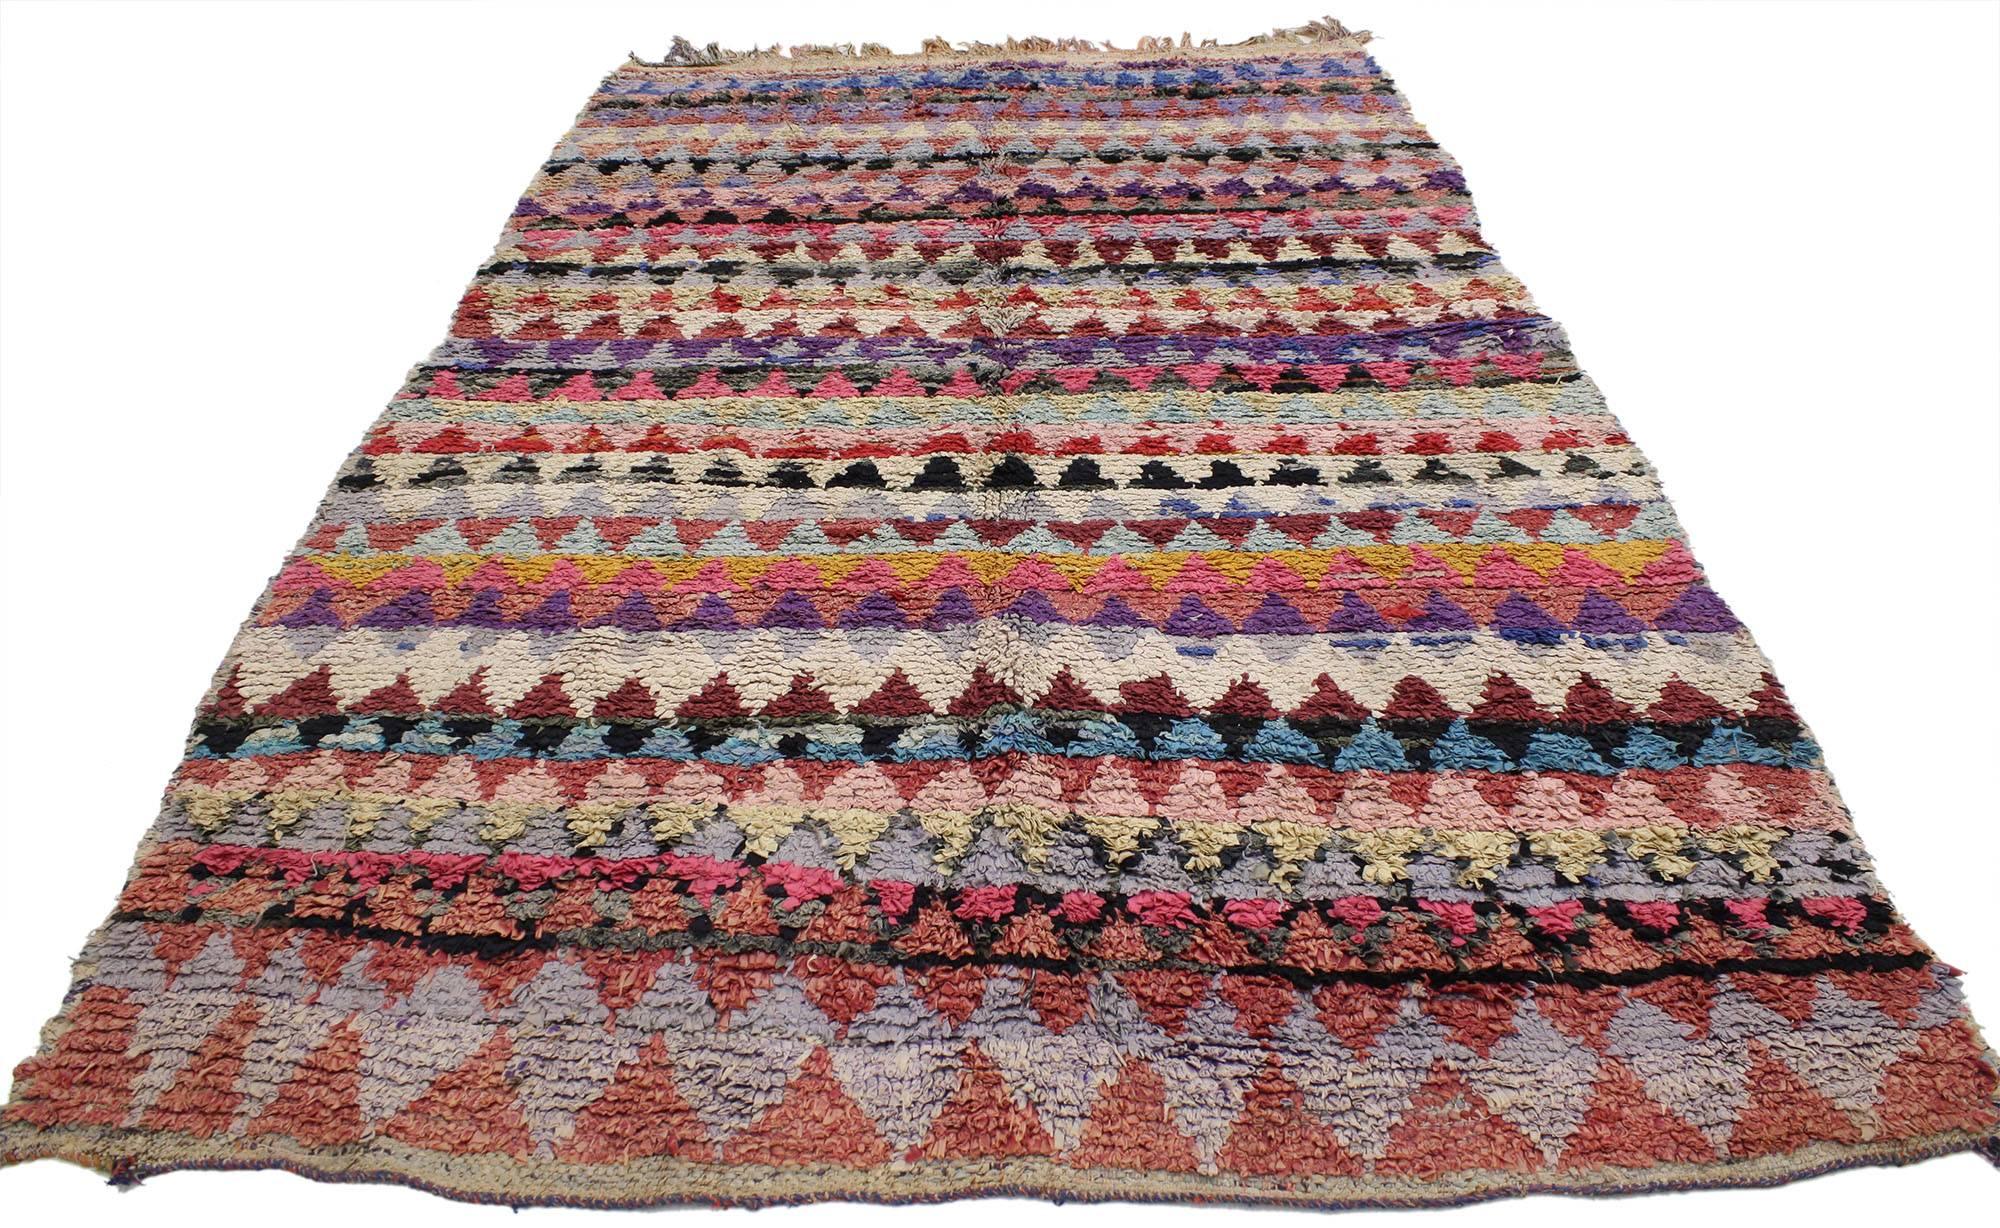 20567 Vintage Berber Moroccan Boucherouite rug. Vivacious shades of the colors woven into this piece work together to create a truly vibrant and life-giving feel. The variegated zigzag color pattern conjures the tribal feeling of Moroccan spirit in